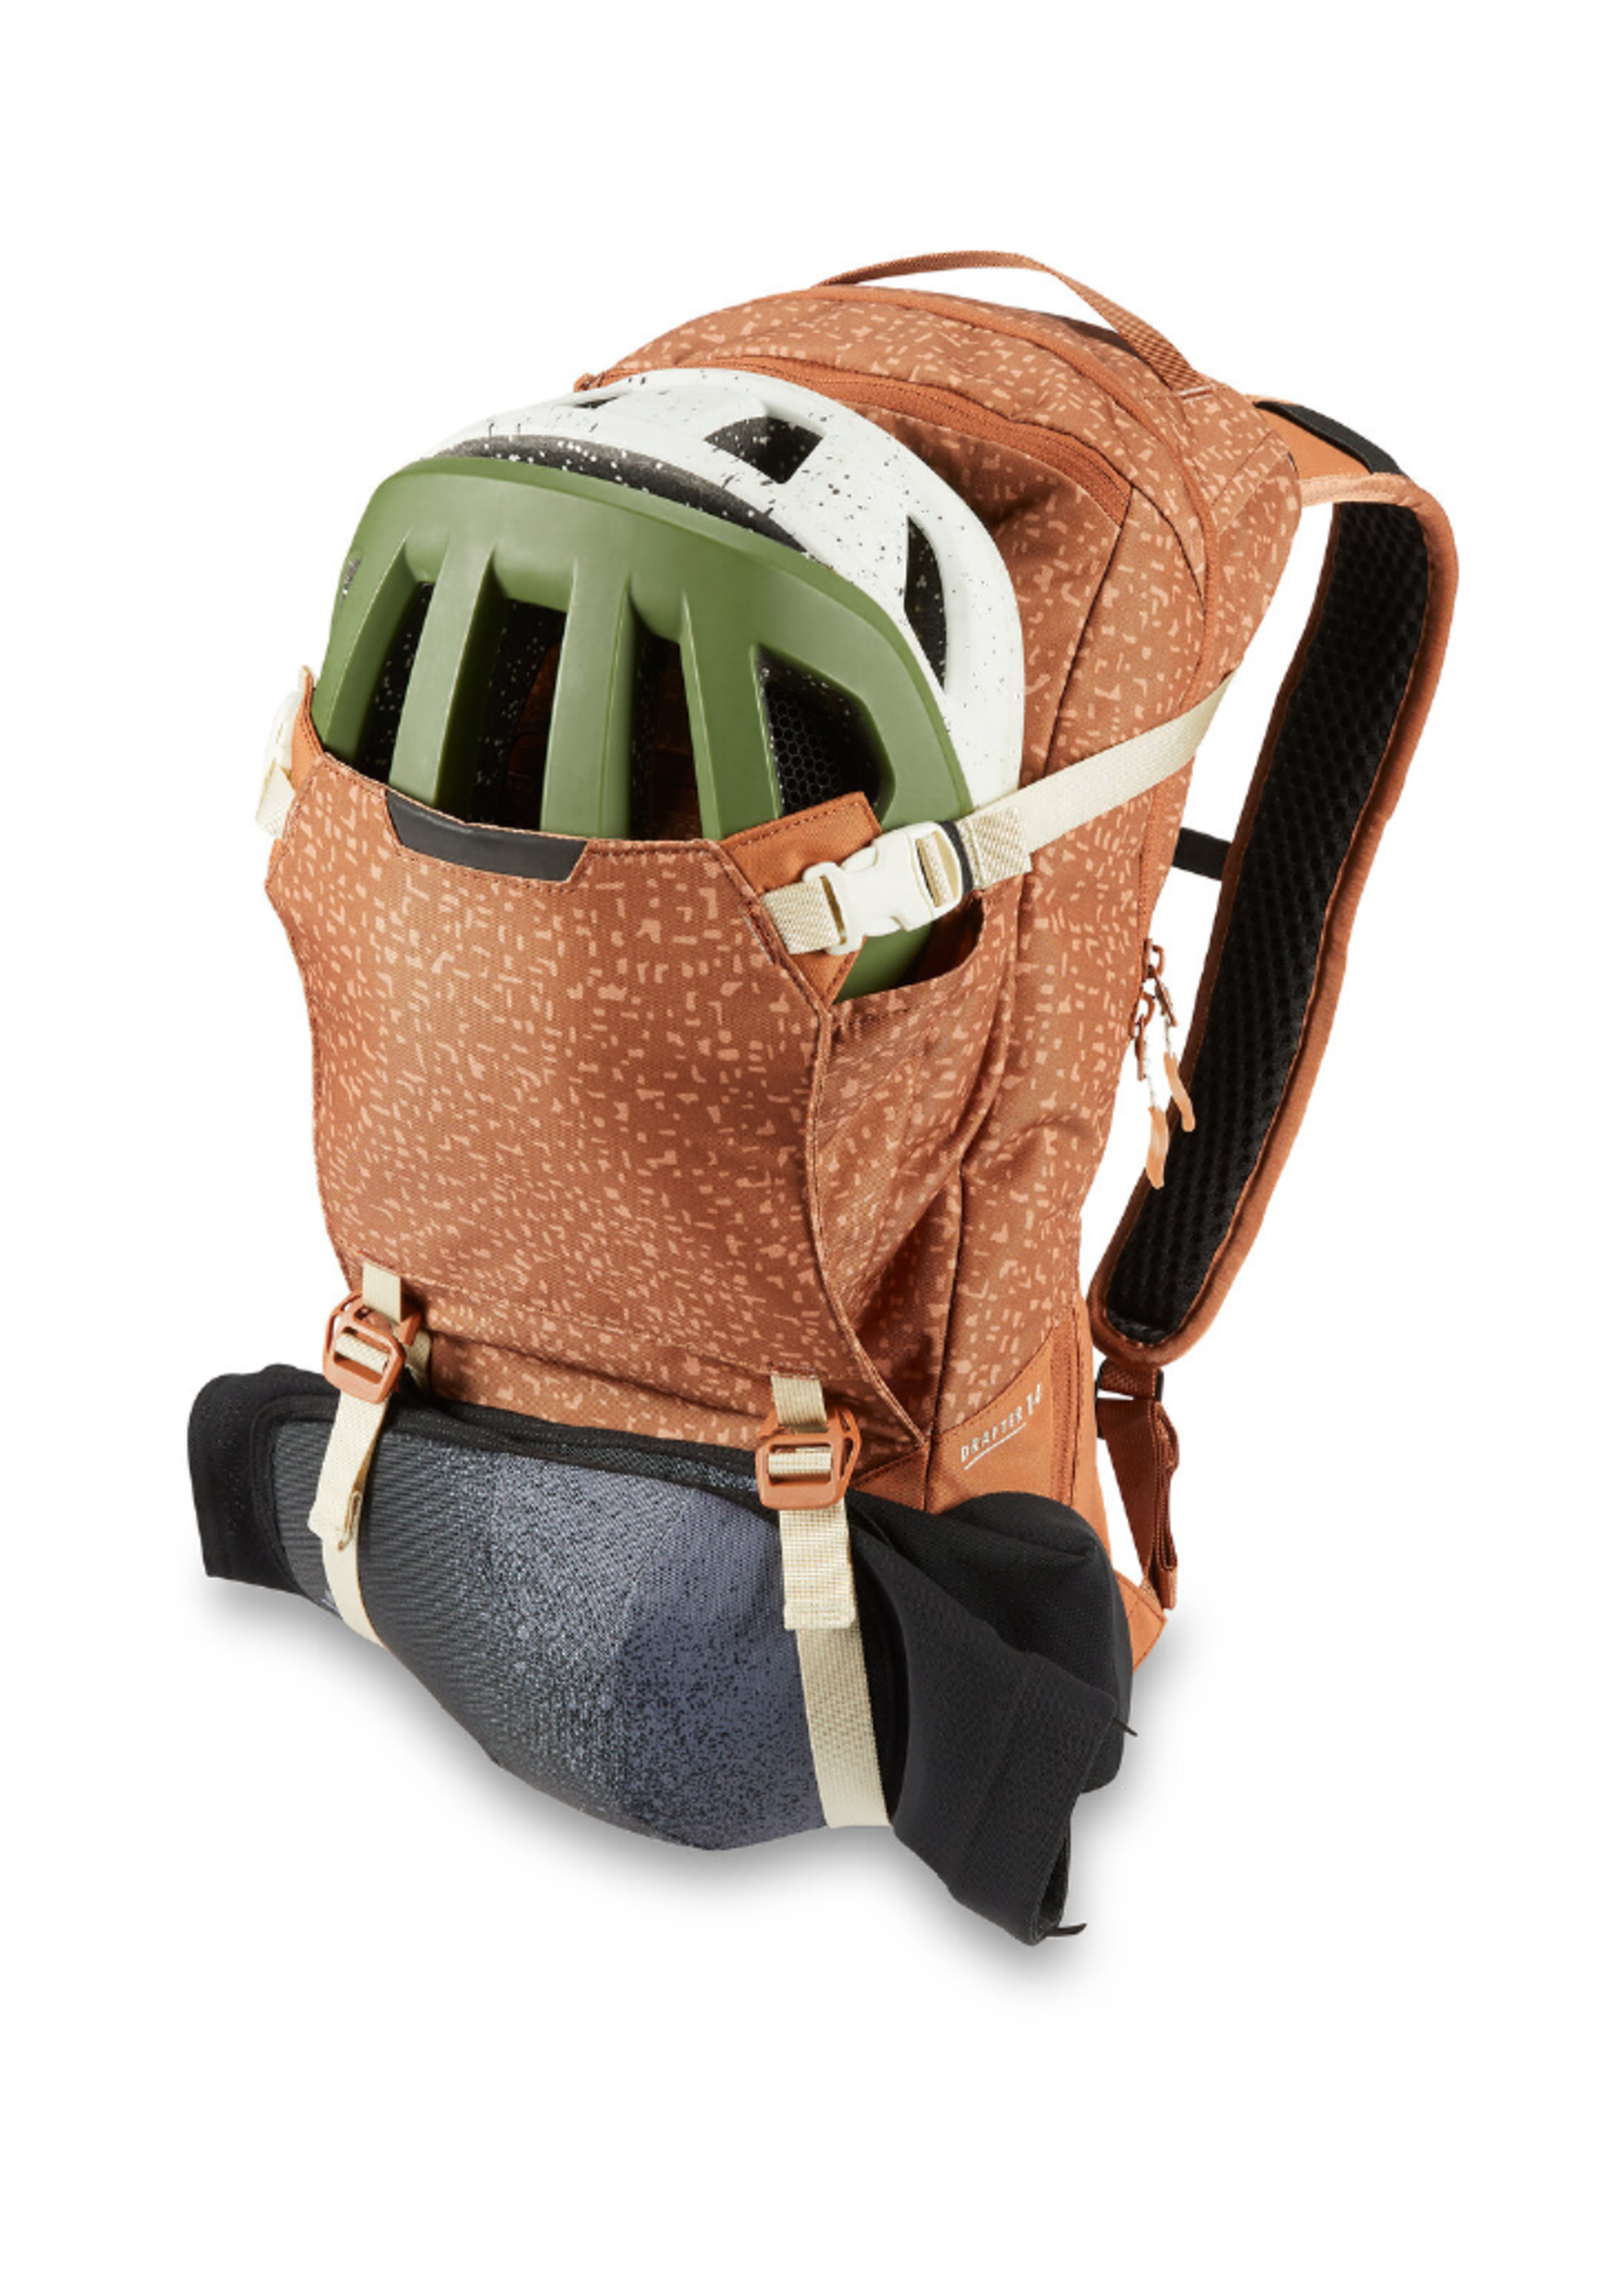 Dakine Drafter Bicycle Hydration Backpack